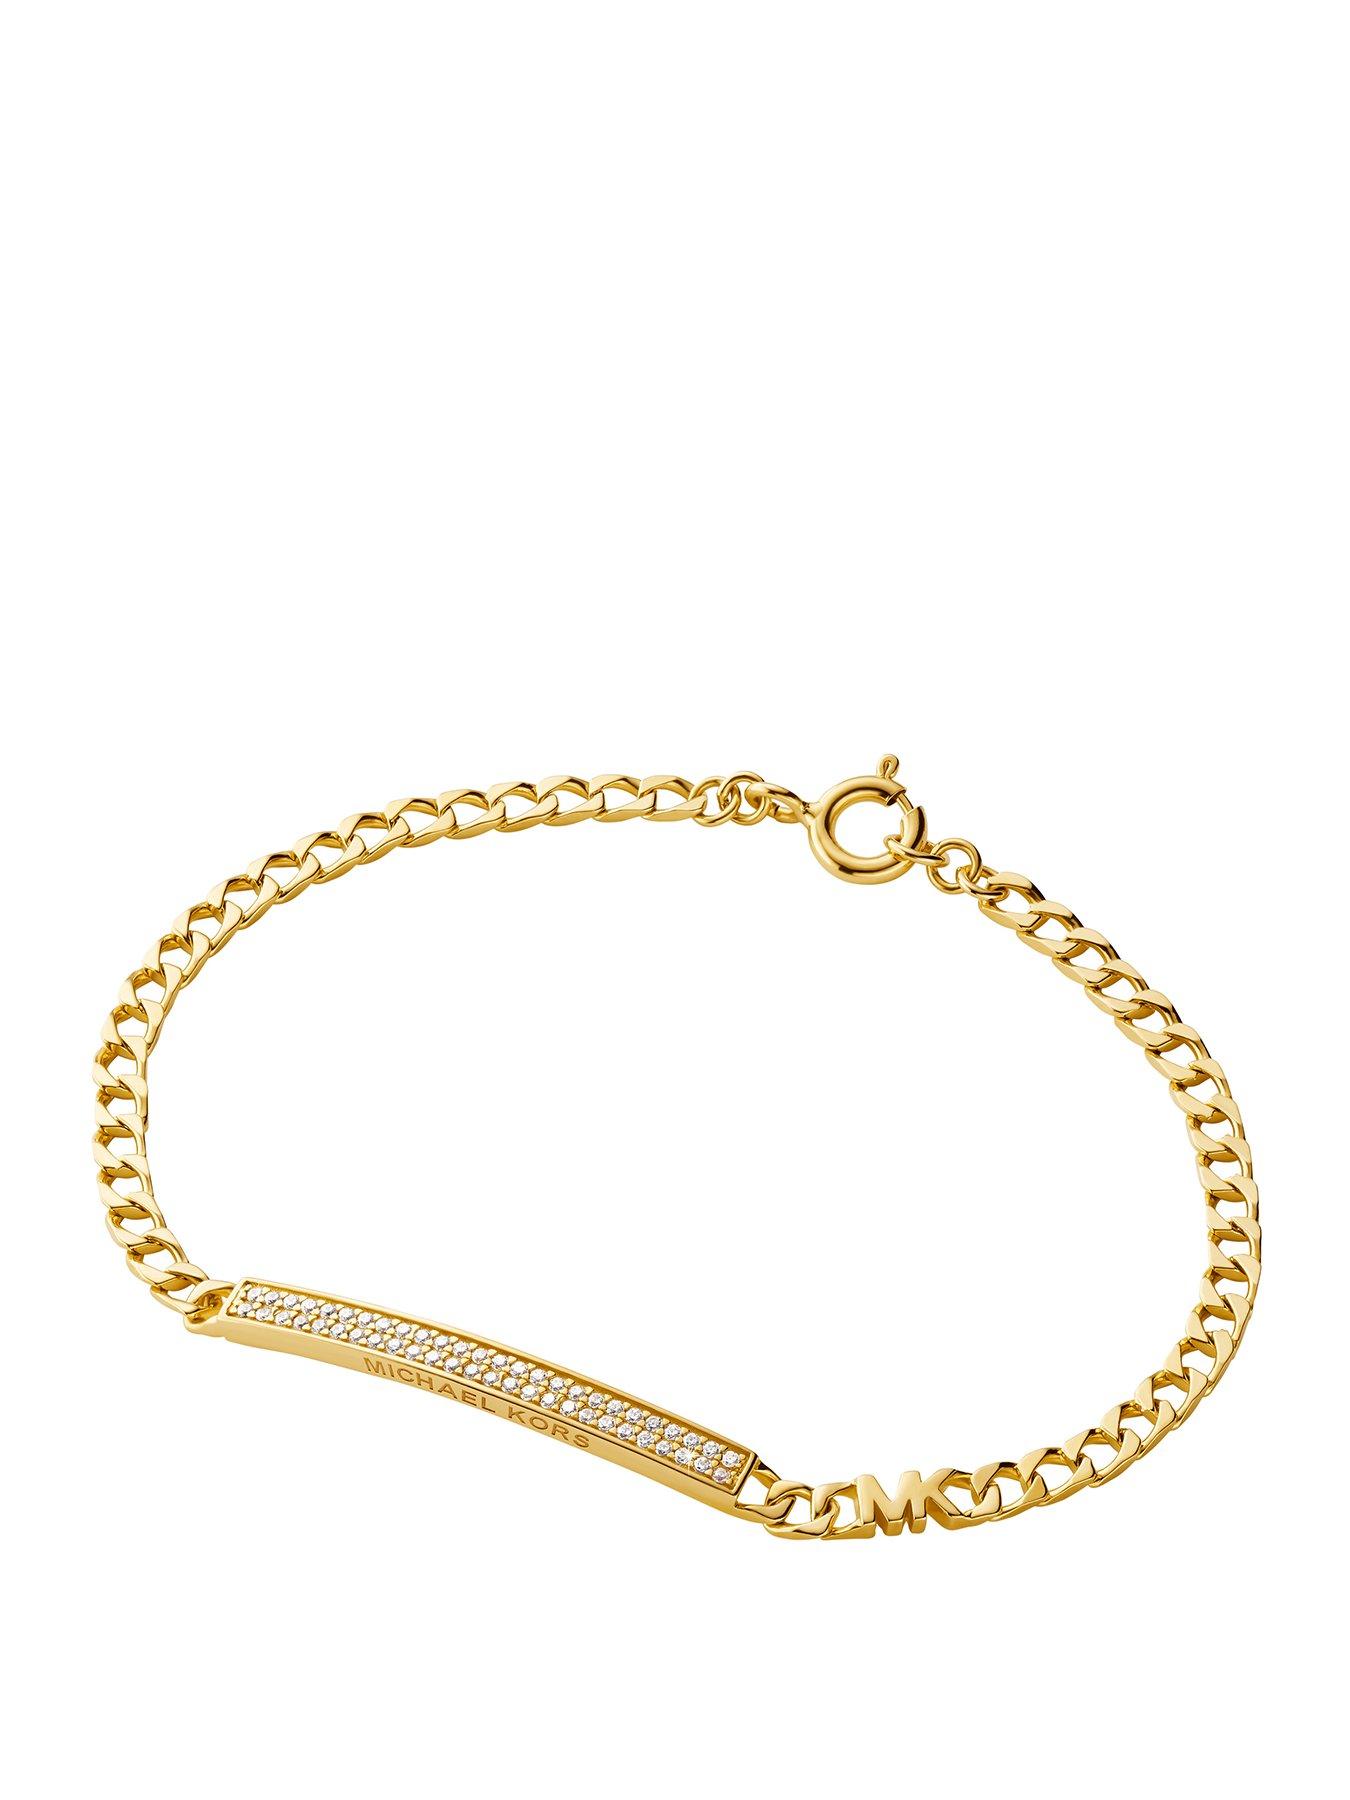  Gold Plated Stainless Steel Curb Statement Bracelet